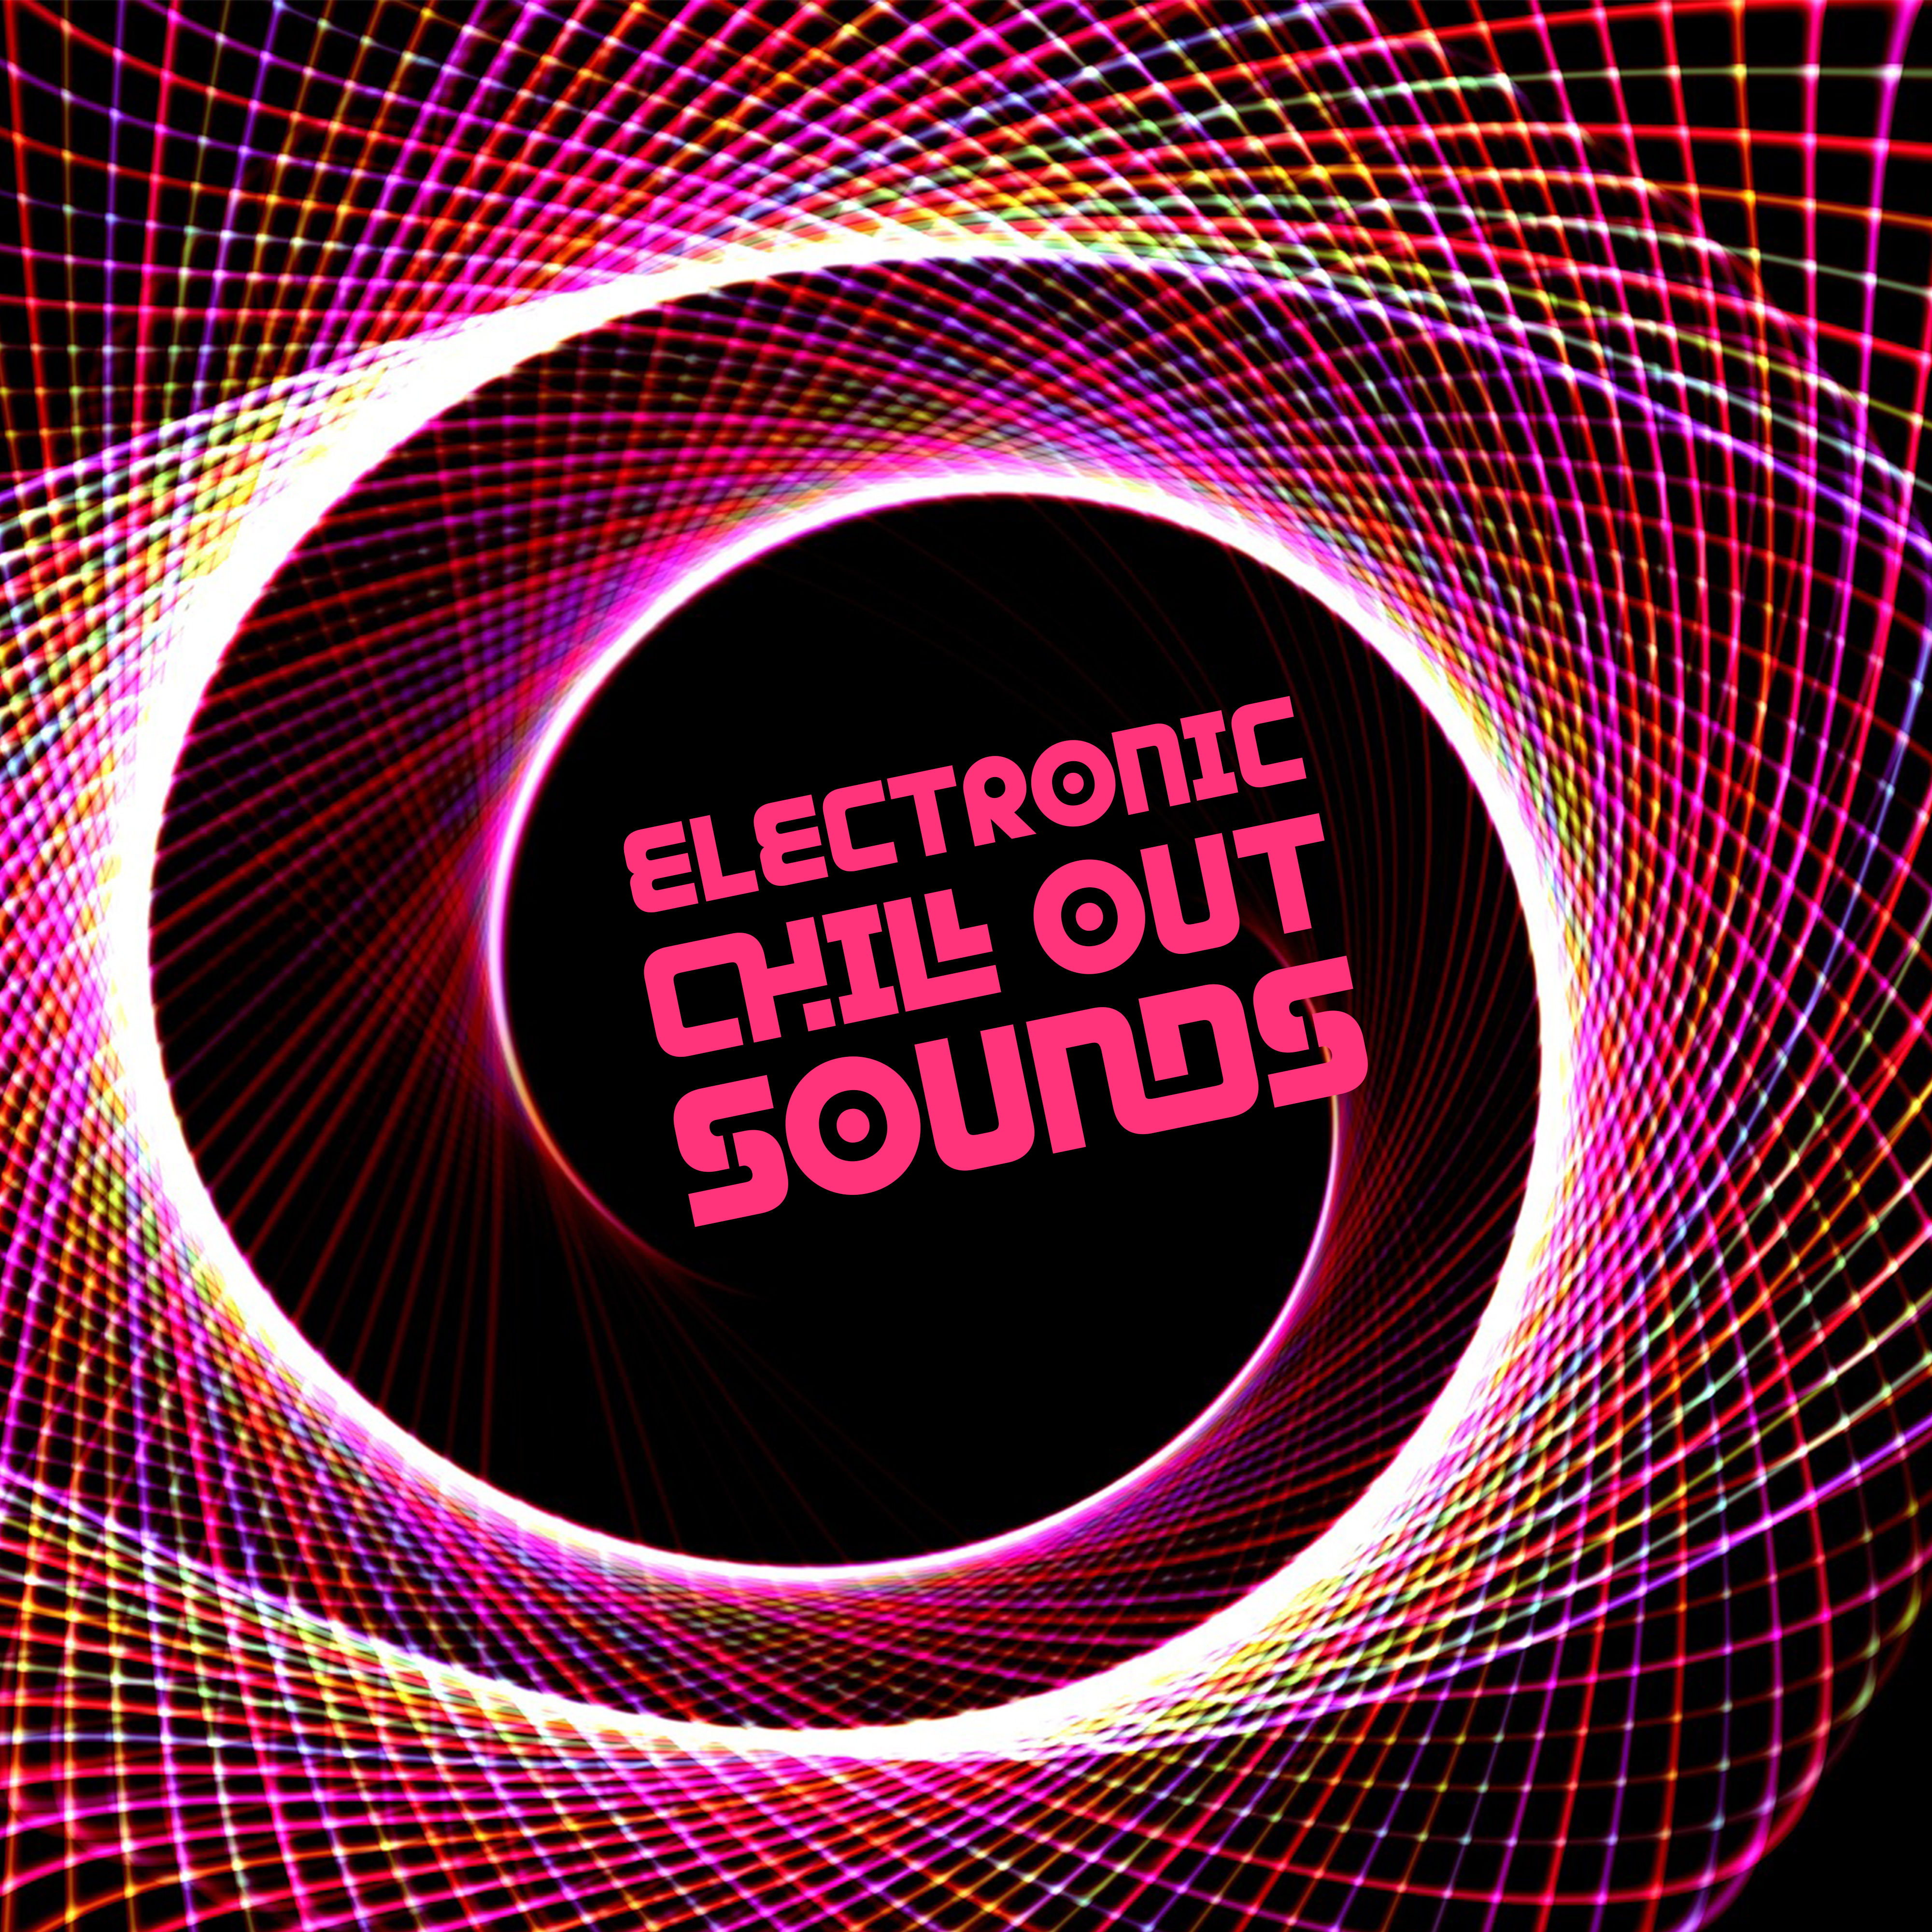 Electronic Chill Out Sounds – Beats for Having Fun, Dance All Night, Ibiza Party Time